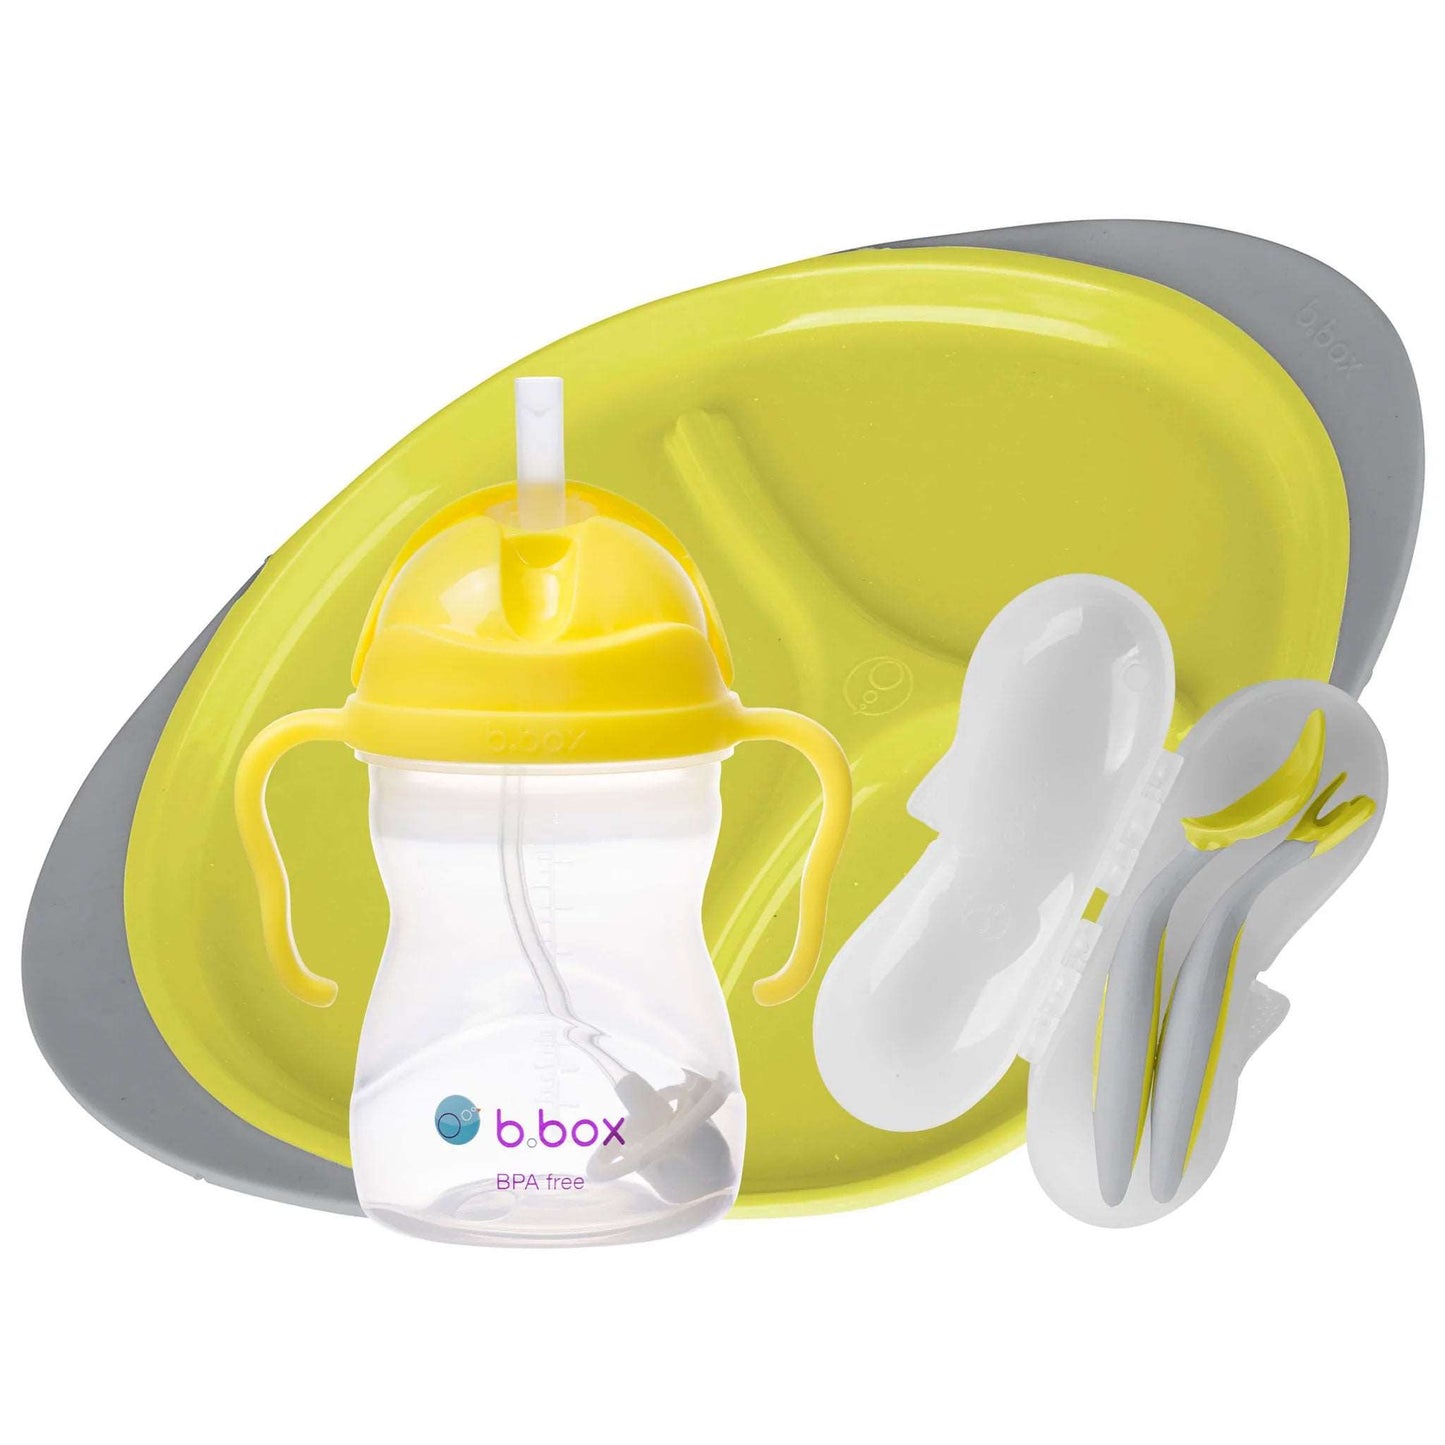 Feeding set includes the award winning sippy cup, toddler cutlery set (spoon and fork) and divided plate, all in a giftable box set.